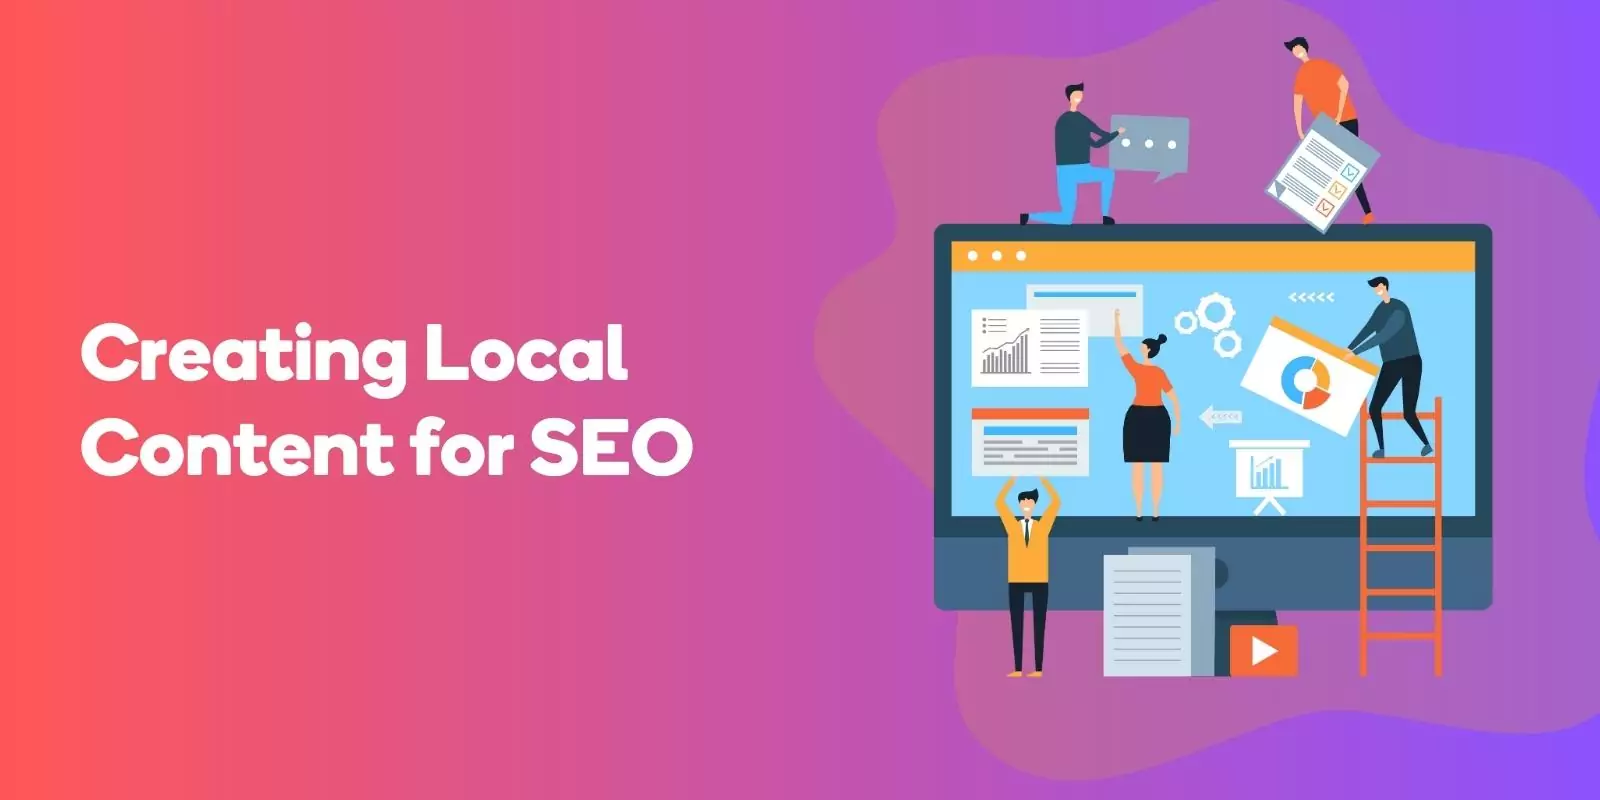 Creating Local Content for SEO